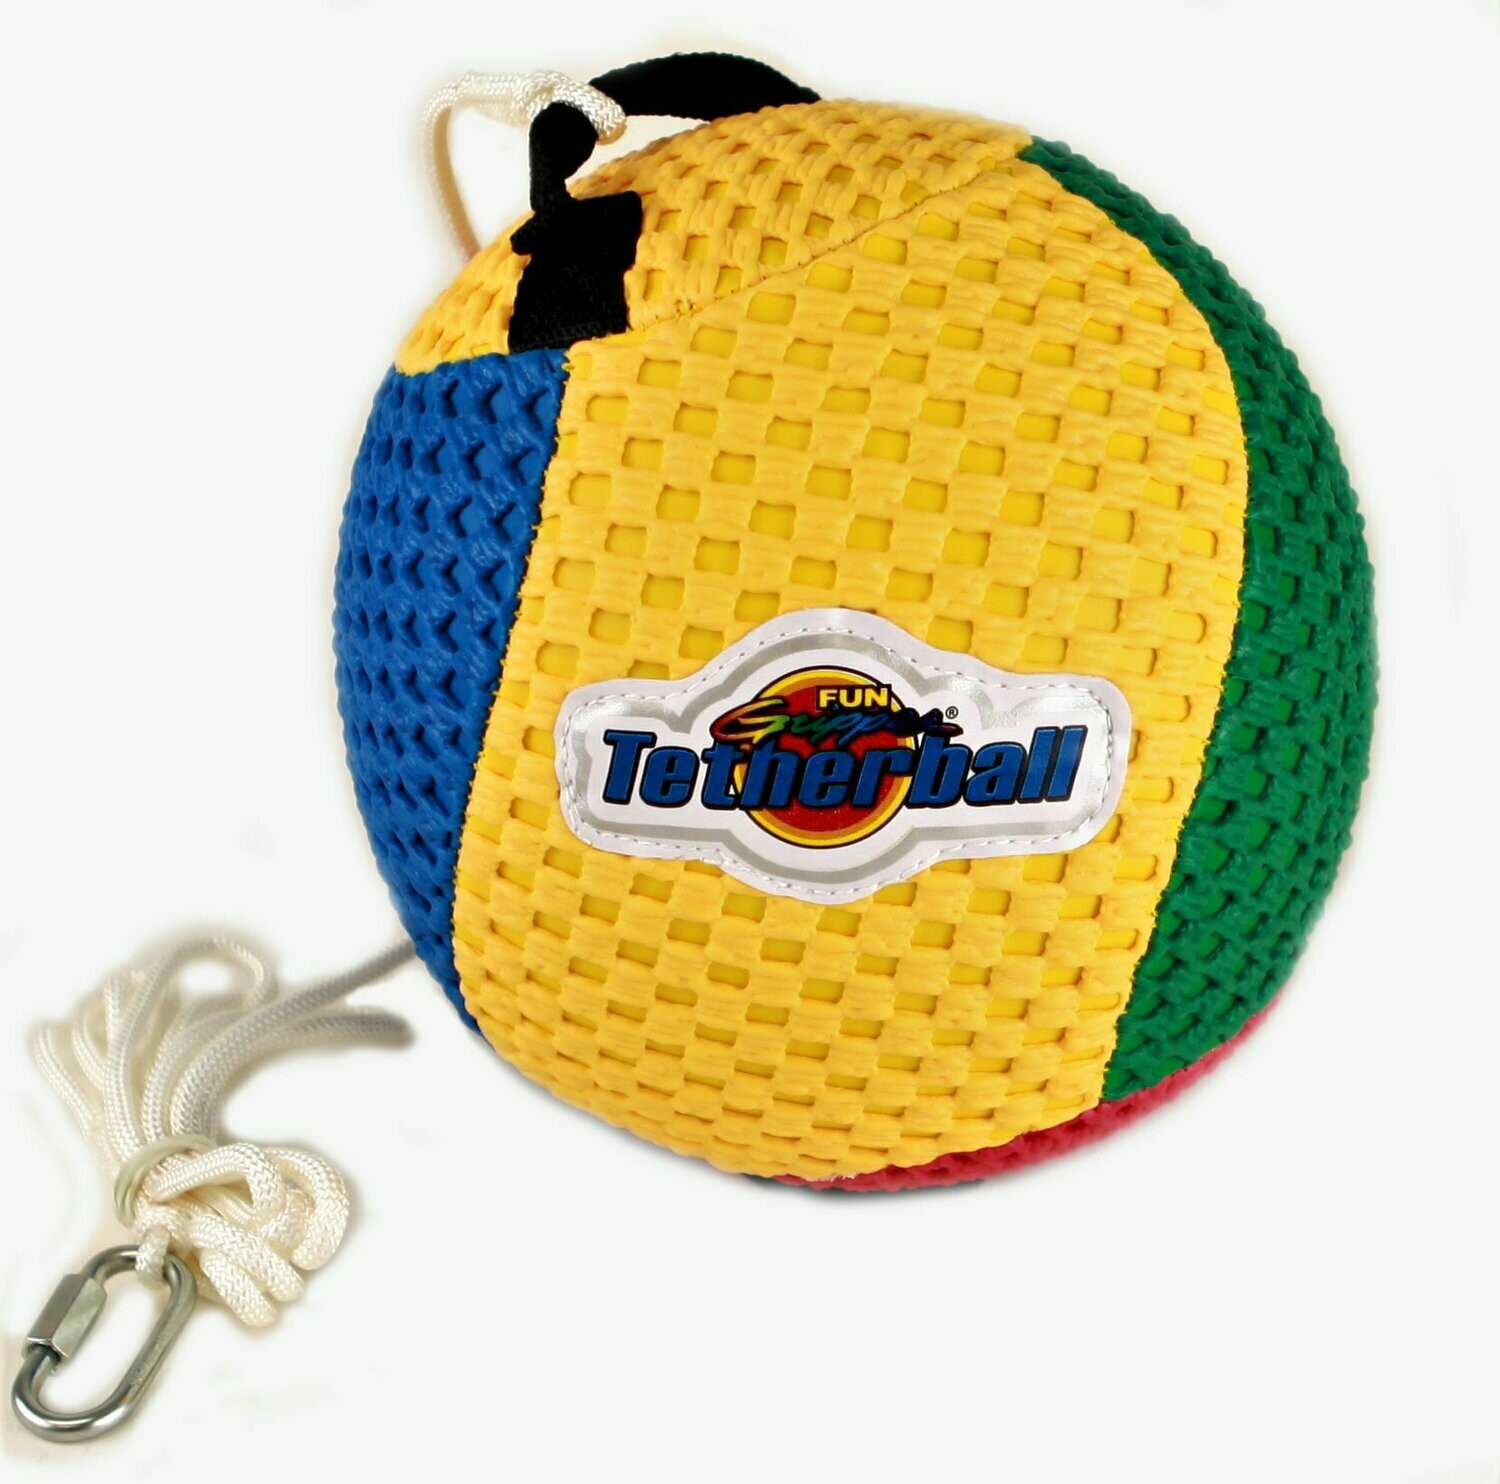 Fun Gripper Tether ball w/ 8 Nylon Rope By Saturnian I 